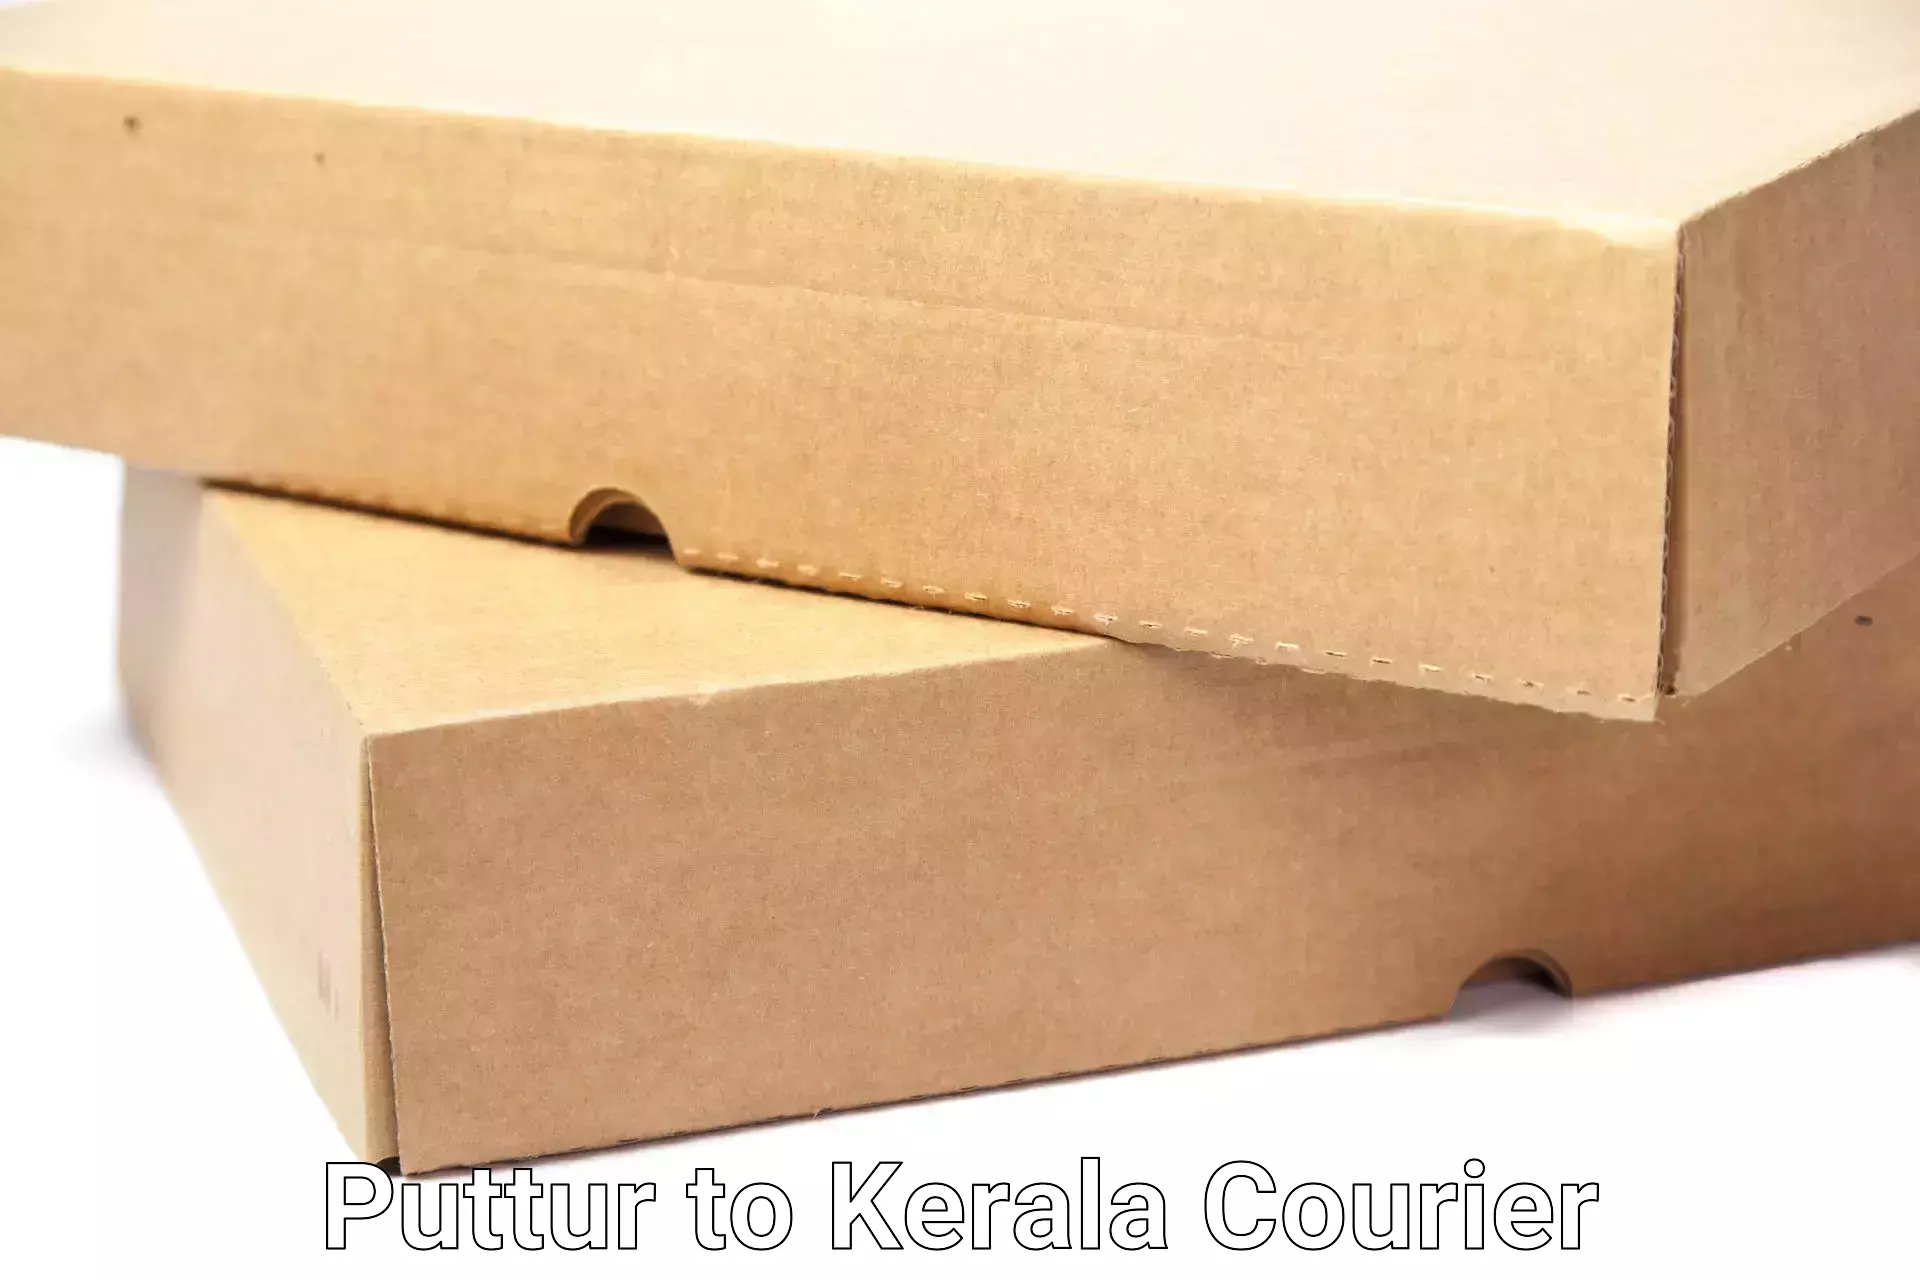 Professional moving company Puttur to Ernakulam